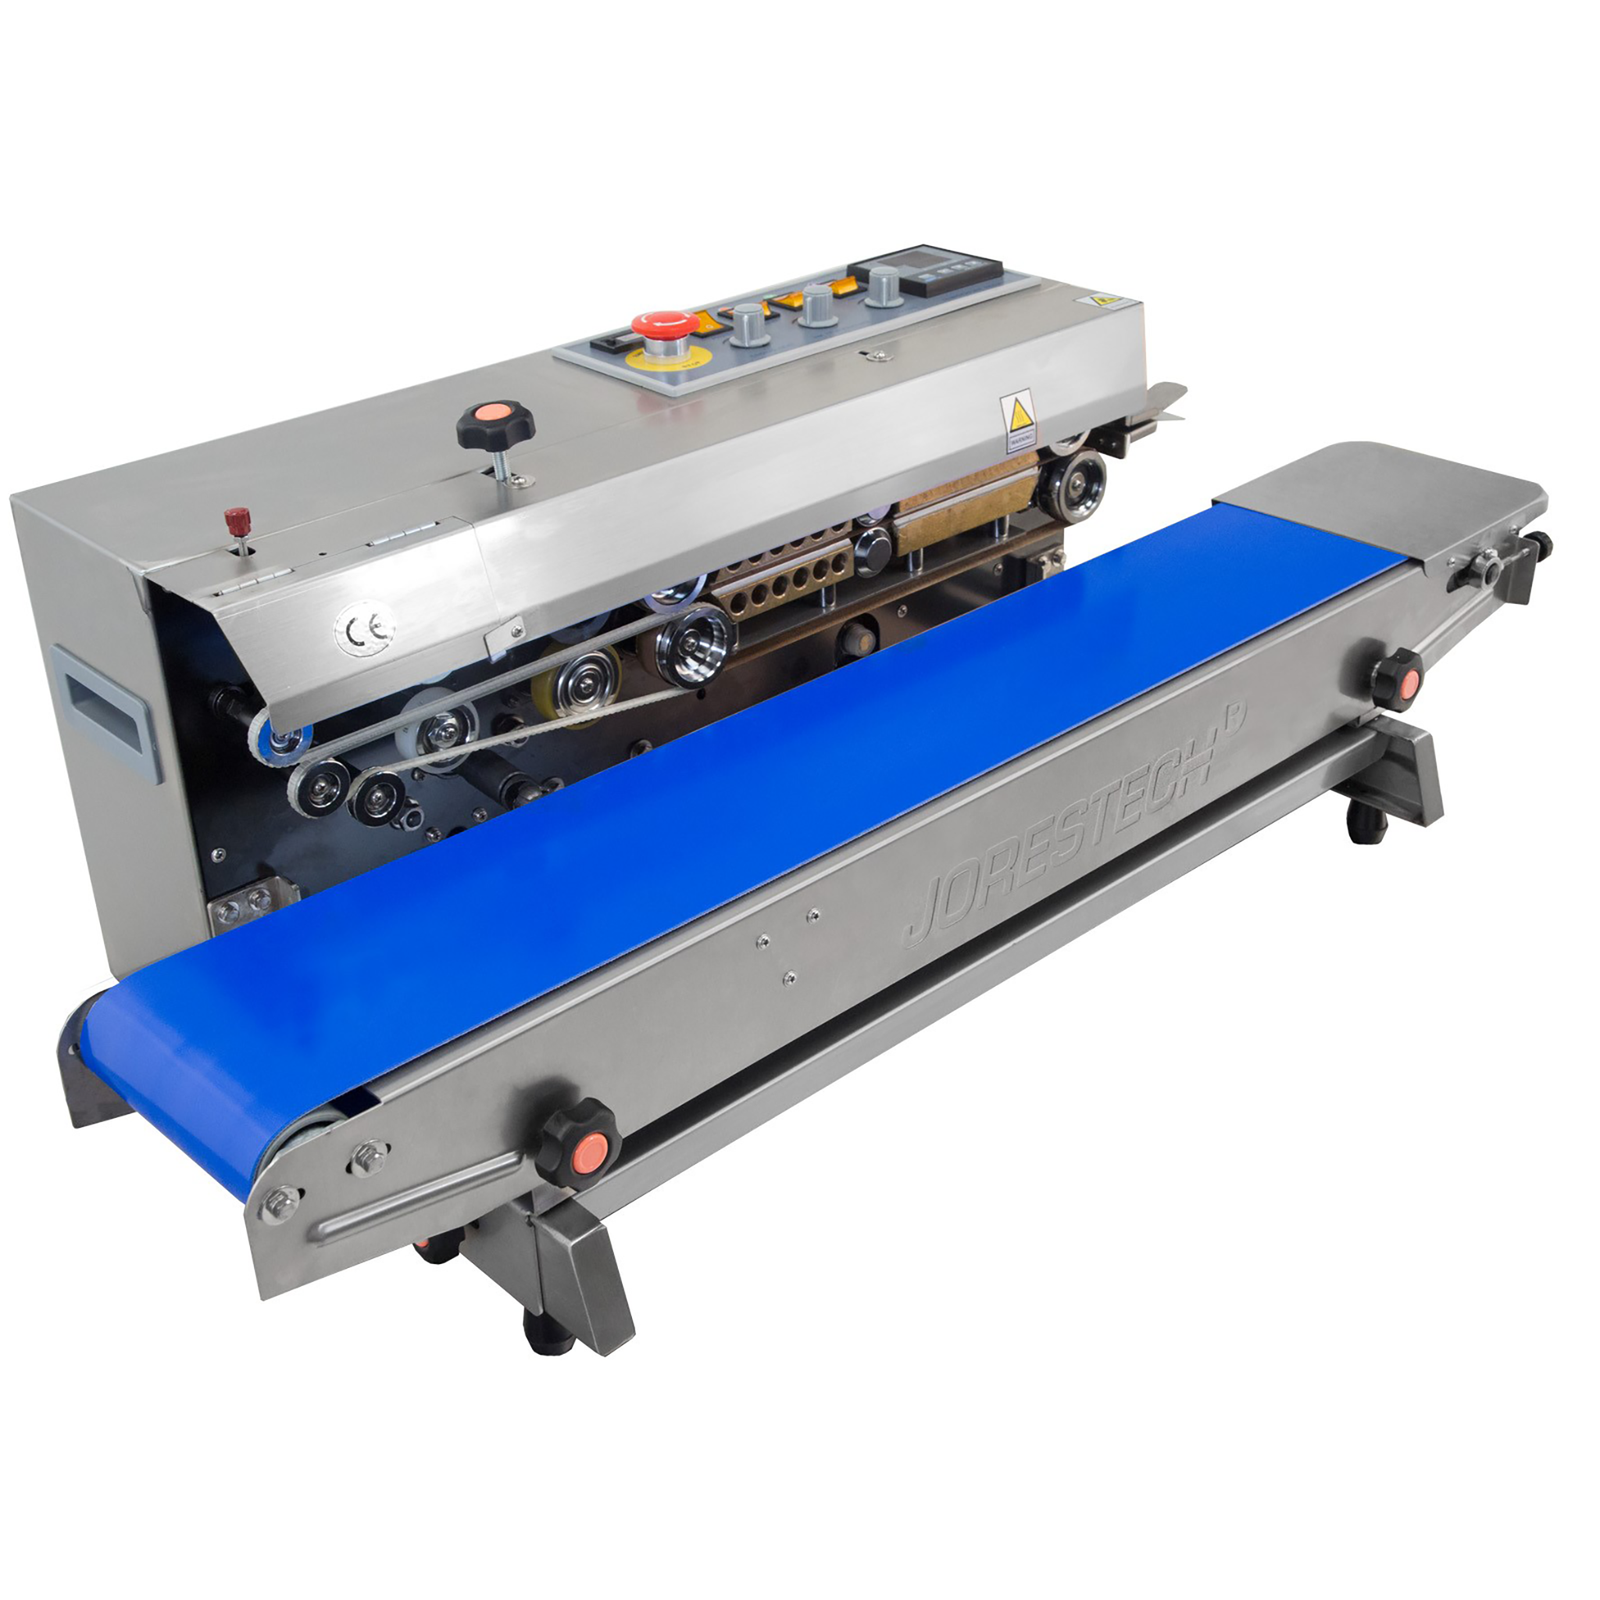  Stainless steel table top digital continuous band sealer for horizontal and vertical applications